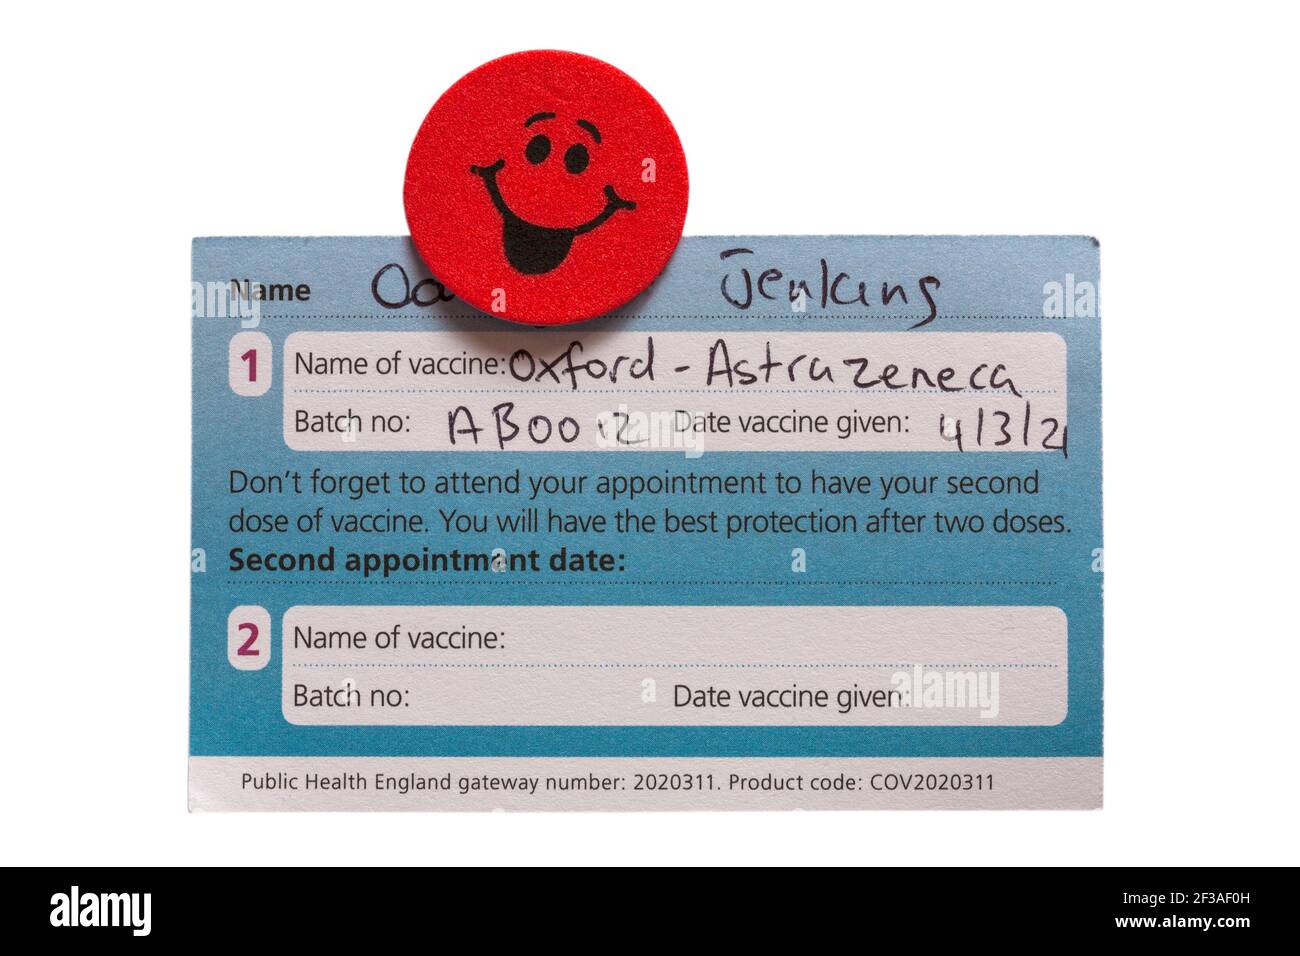 Covid-19 vaccination record card issued by NHS for Oxford AstraZeneca vaccine, Oxford Astra Zeneca vaccine with smiley face emoji sticker Stock Photo